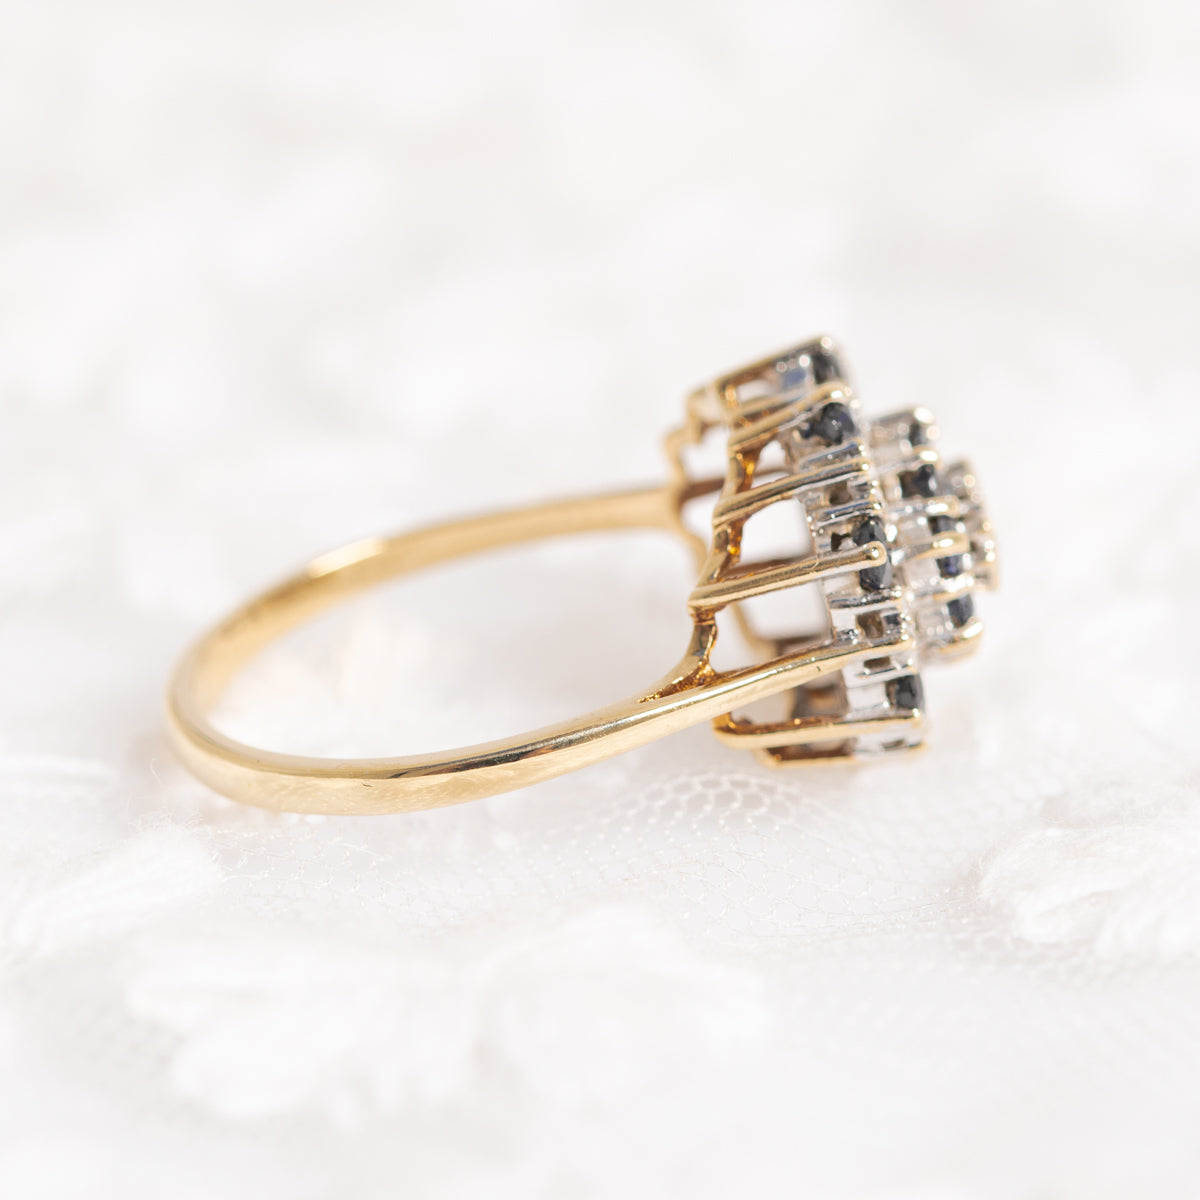 Vintage 9ct Gold Natural Sapphire & Diamond Double Cluster Dress Ring UK Size N1/2 (A1286)